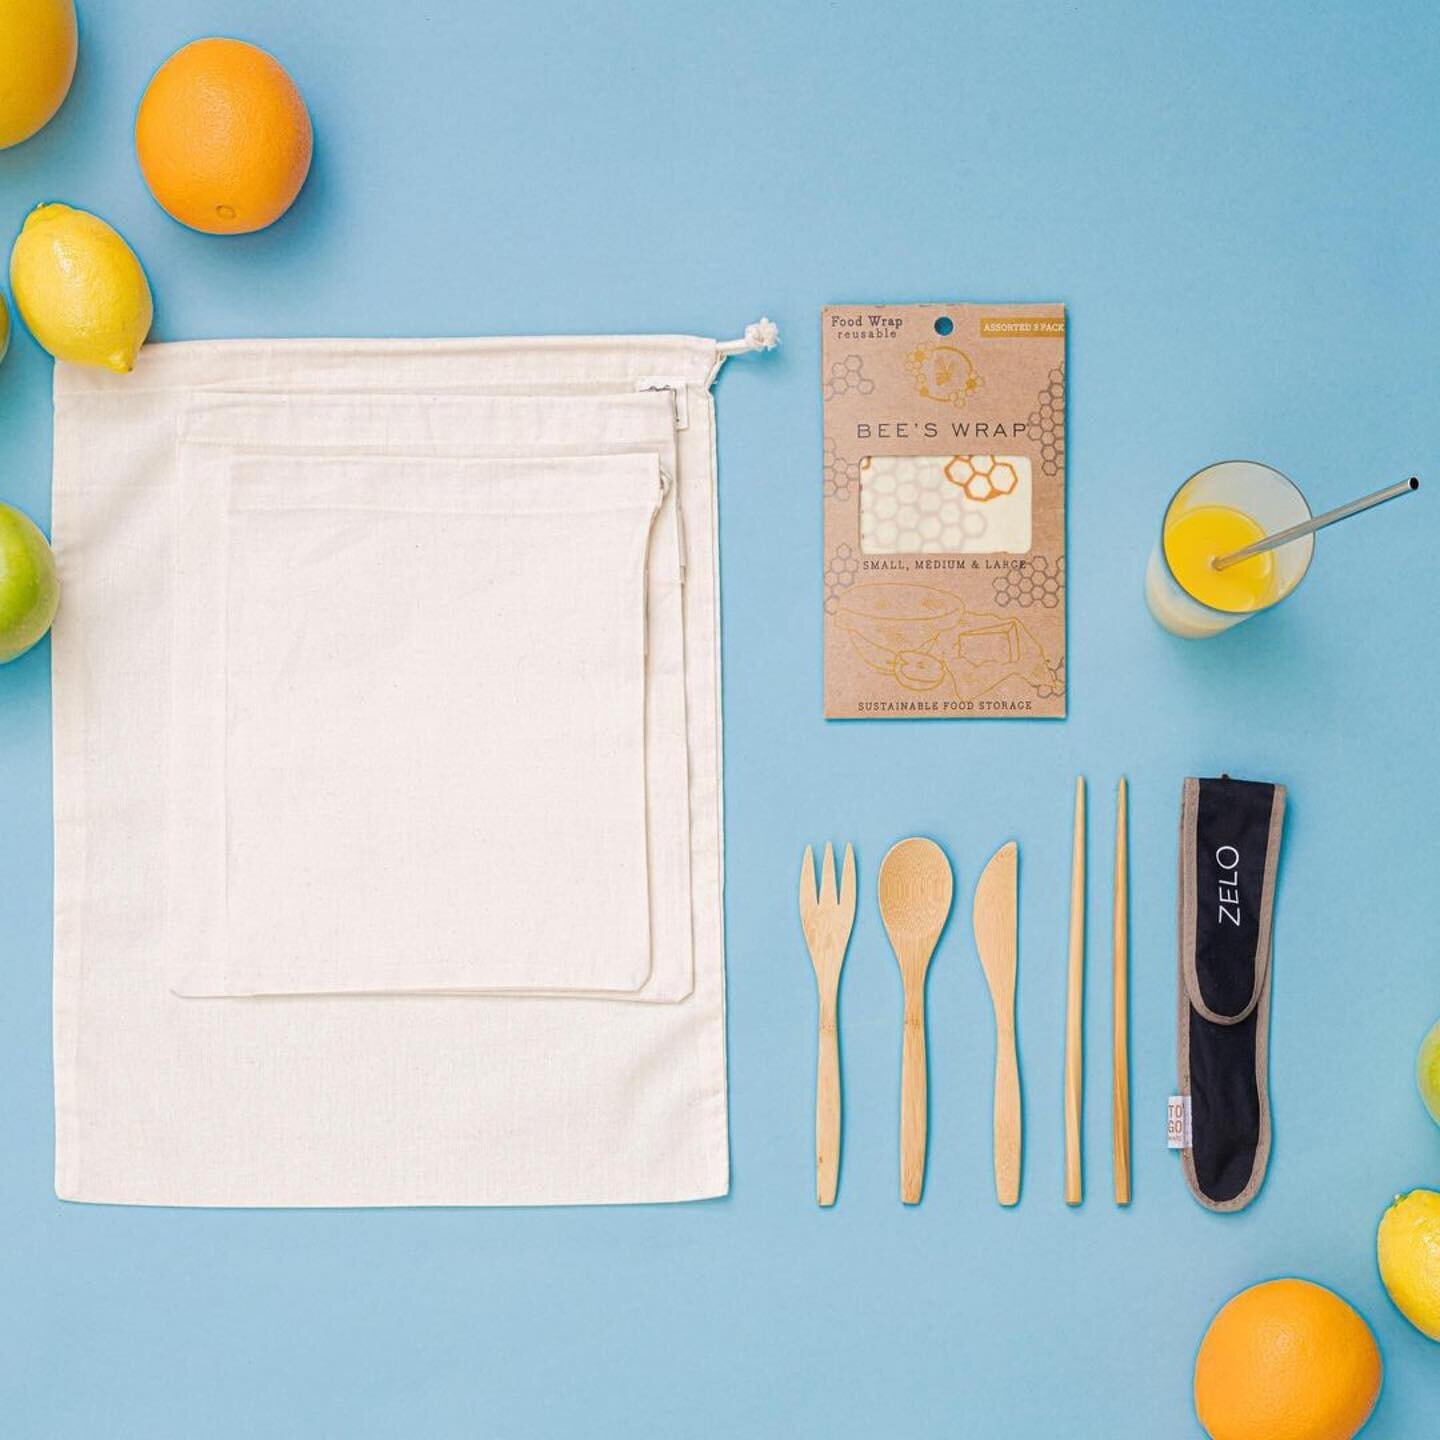 @zelo.world is on a mission to help reduce everyday plastic waste. 
Founded by two friends, Anne Bureau and Marion Barel, check out their eco-friendly products and kits next weekend at our Summer Pop-up in Boerum Hill, Brooklyn!

June Markets
☀️&nbsp